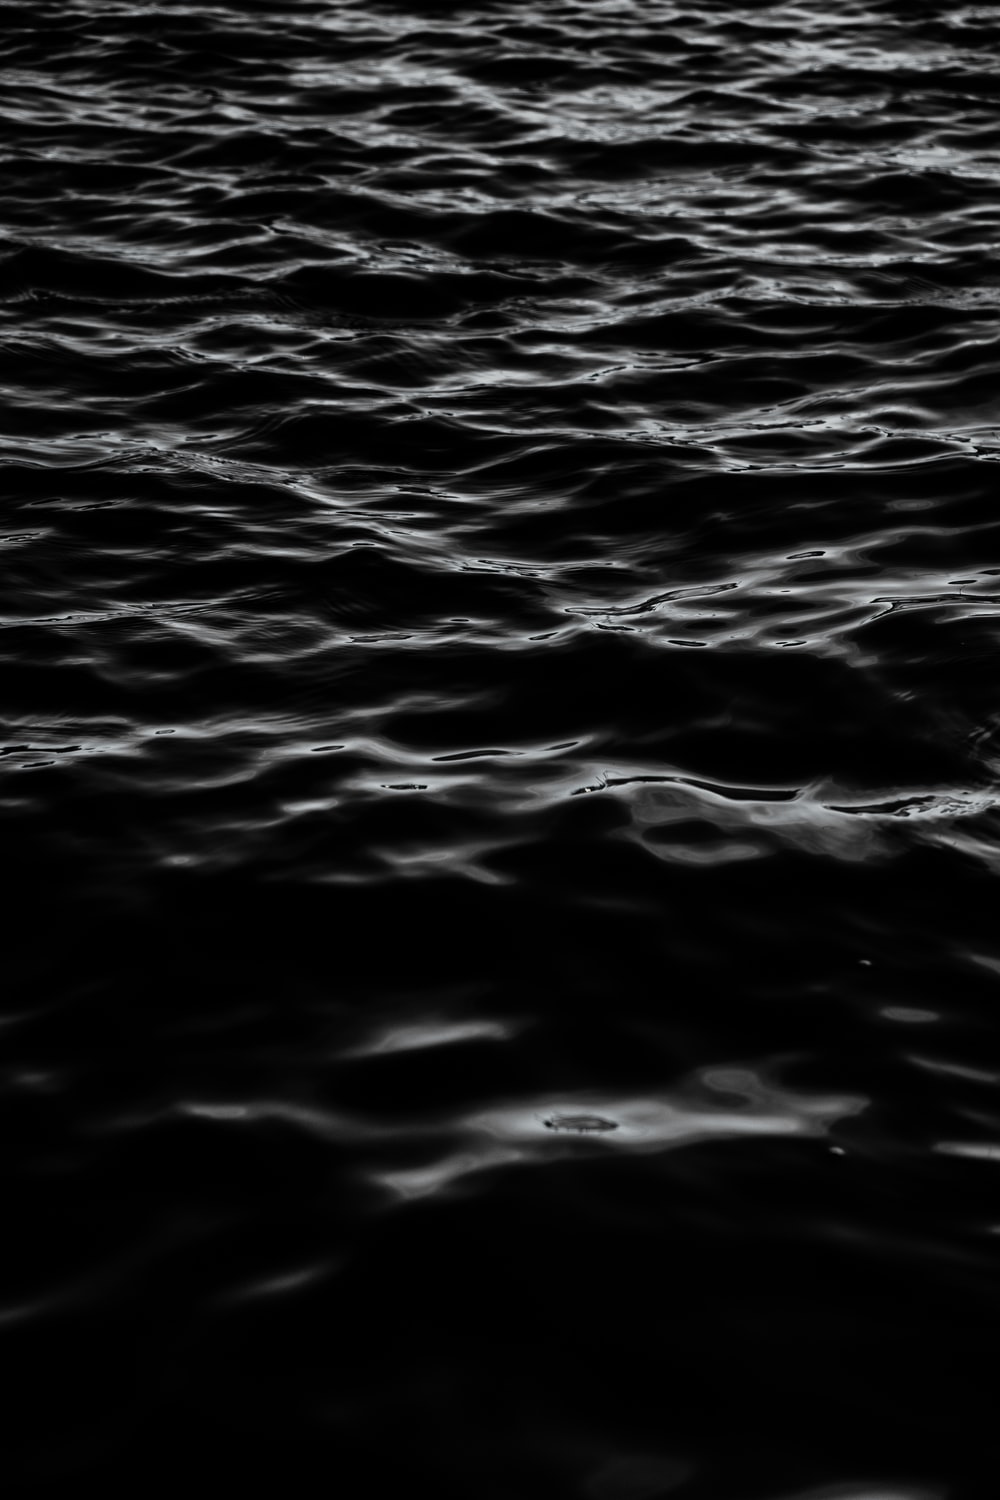 Black Water Picture. Download Free Image